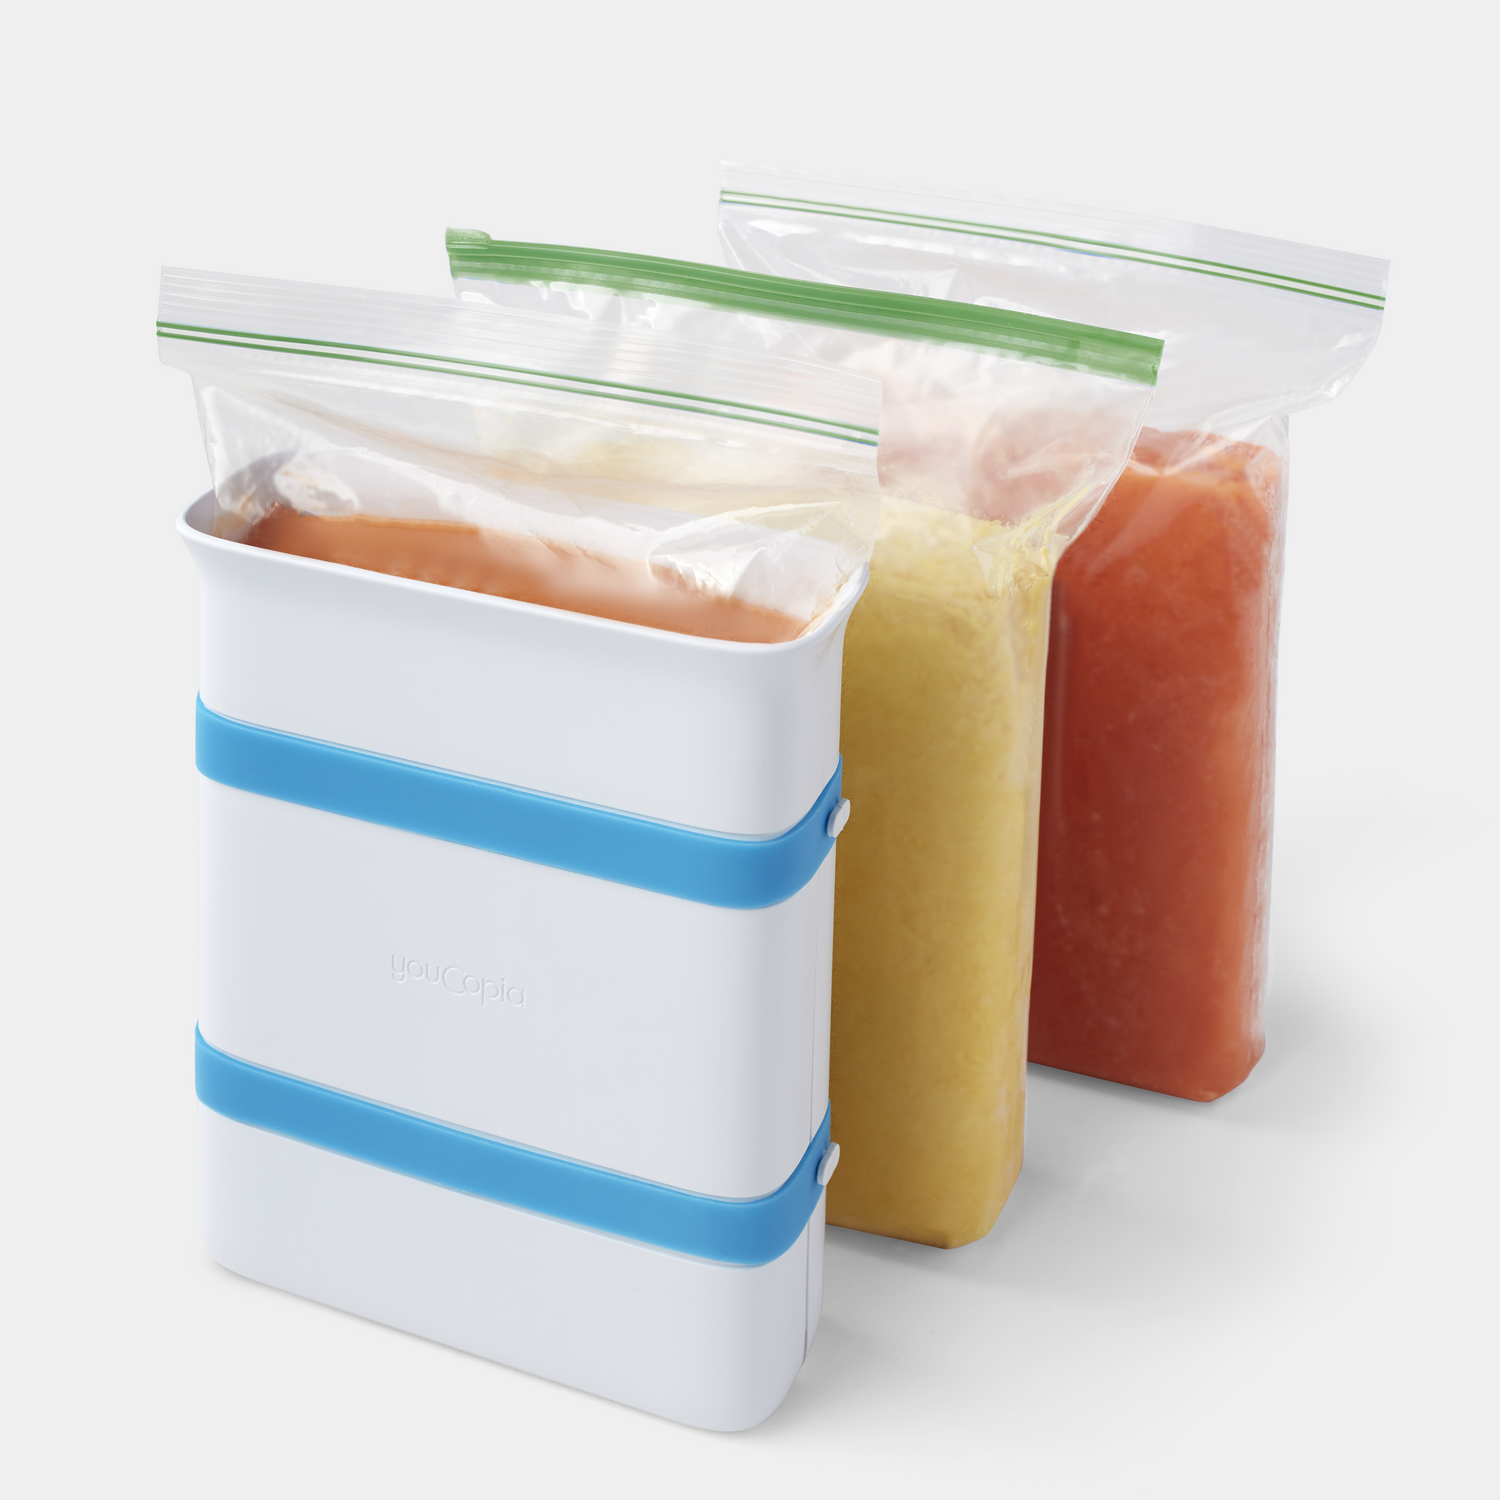 Freezer Food Block Mold Fefrigerators Meal Prep Bag Container to